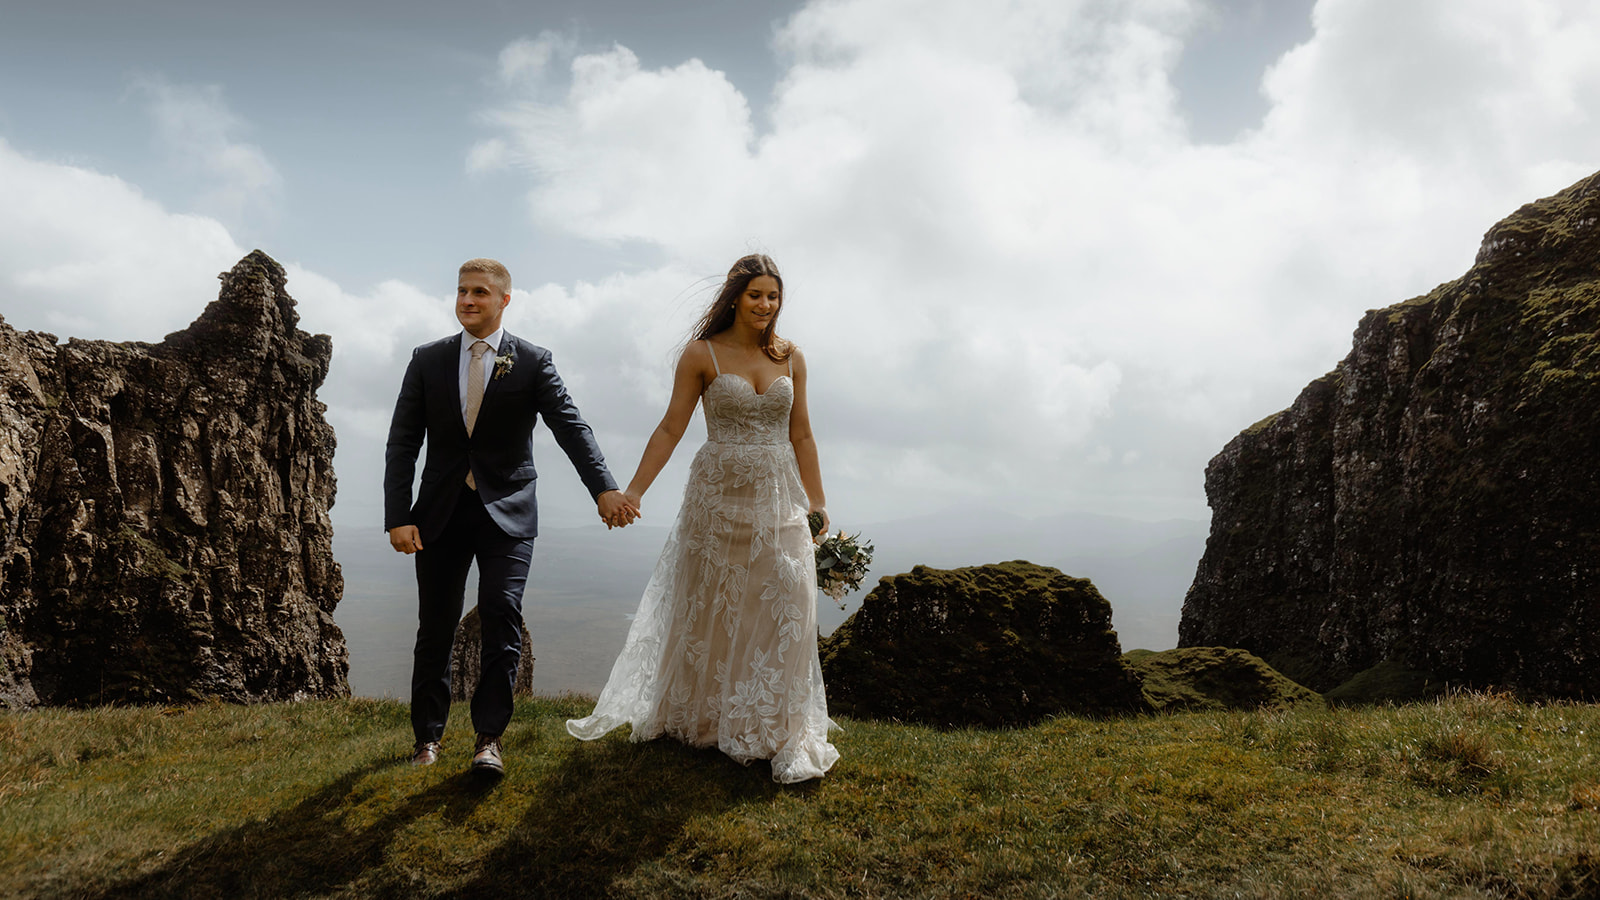 Emma and Matthew walked hand in hand as they stroll around Quiraing, Isle of Skye, during their elopement day.